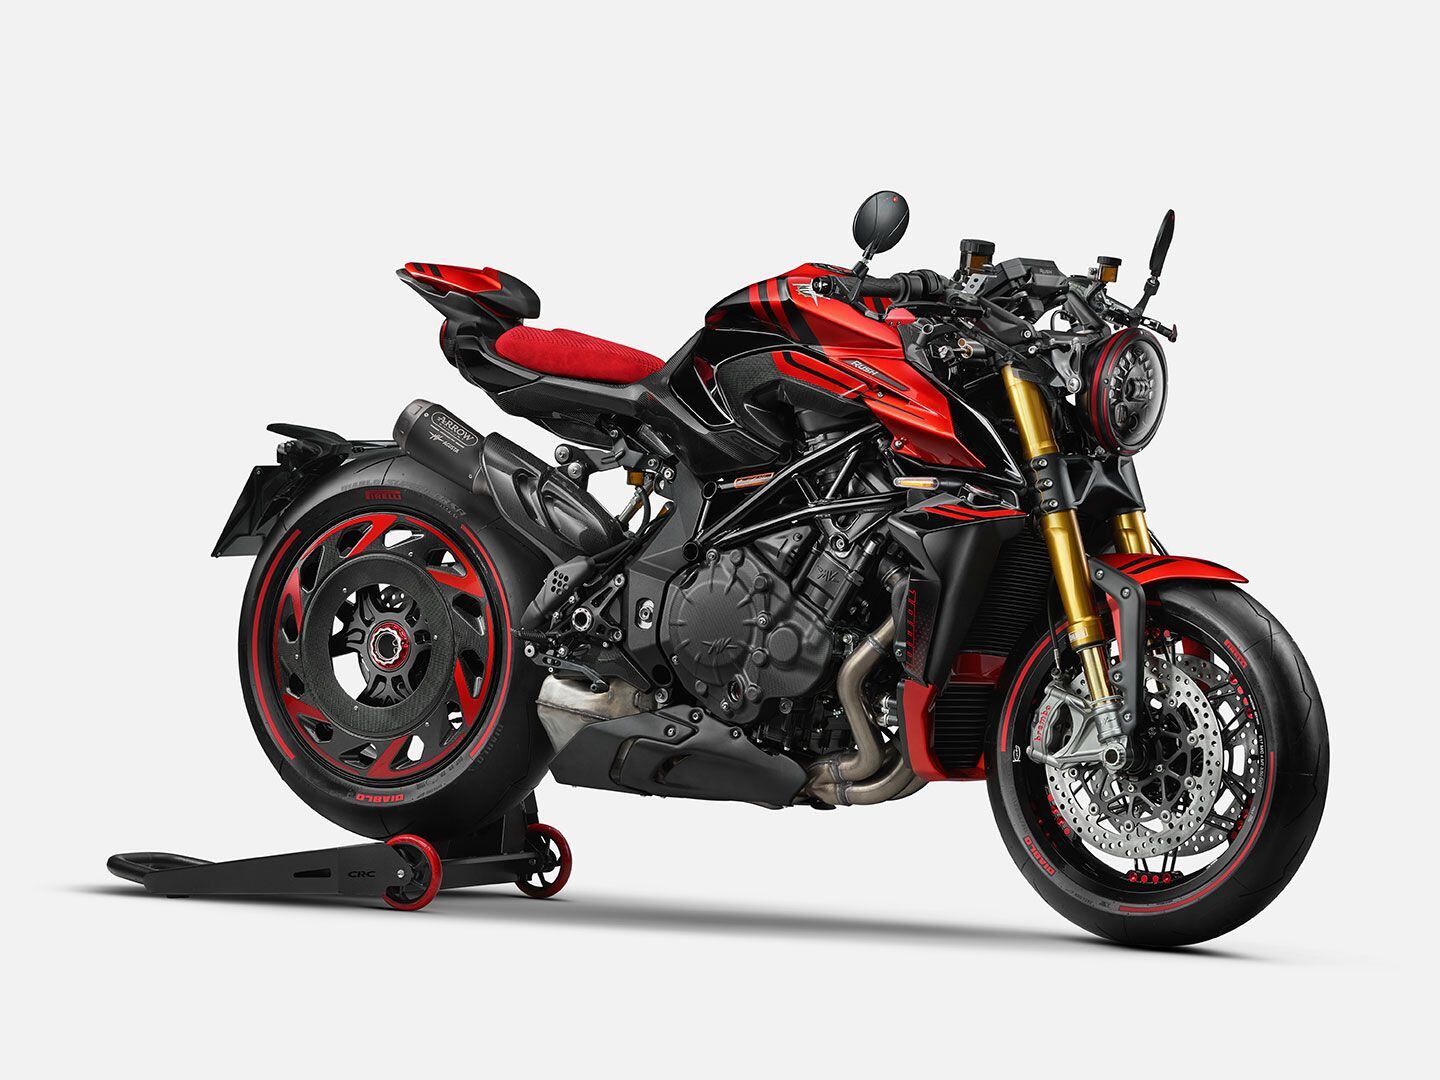 The MV Agusta Rush is one-of-a-kind aesthetically and dripping with up-spec features.